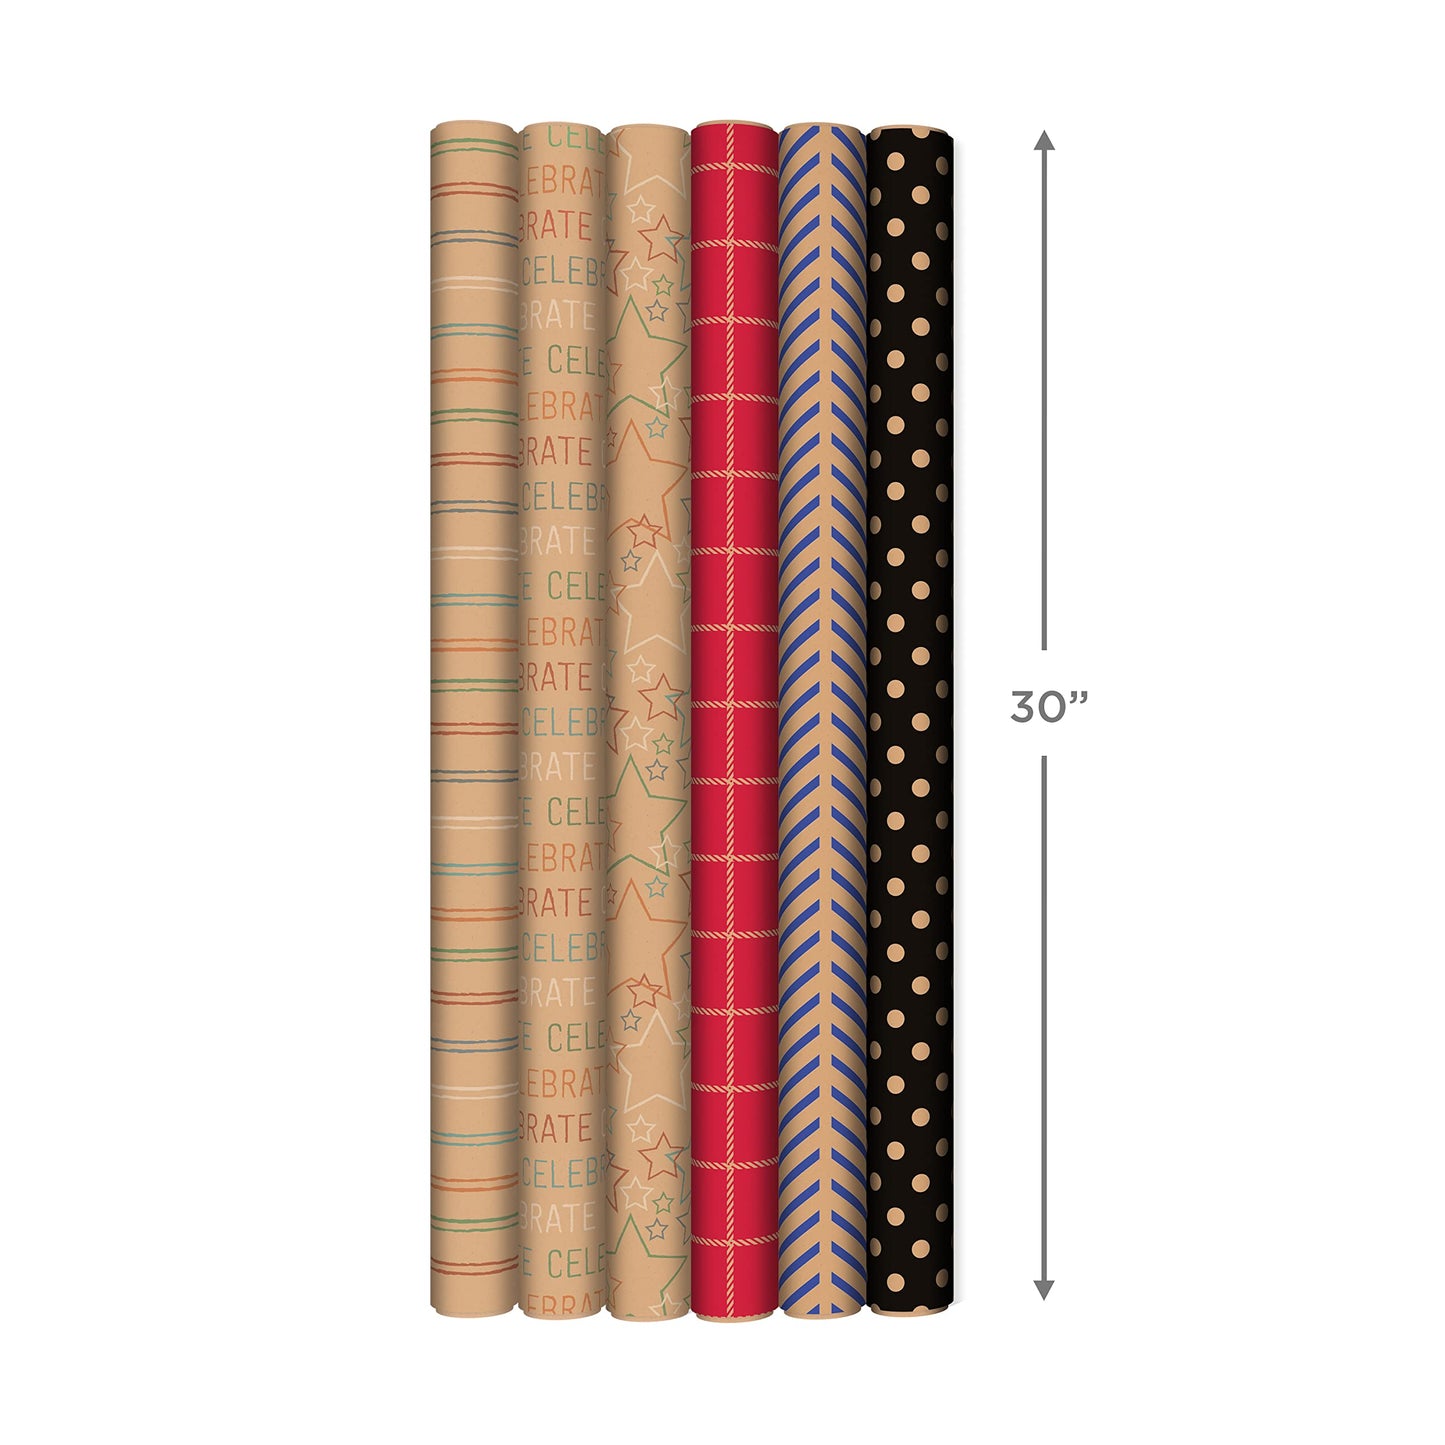 Hallmark Recyclable Wrapping Paper with Cutlines on Reverse (6 Rolls: 120 Square Feet Total) Red Grid, Blue Chevron, Rainbow Stars,"Celebrate" on Kraft Brown for Birthdays, Graduations, Father's Day